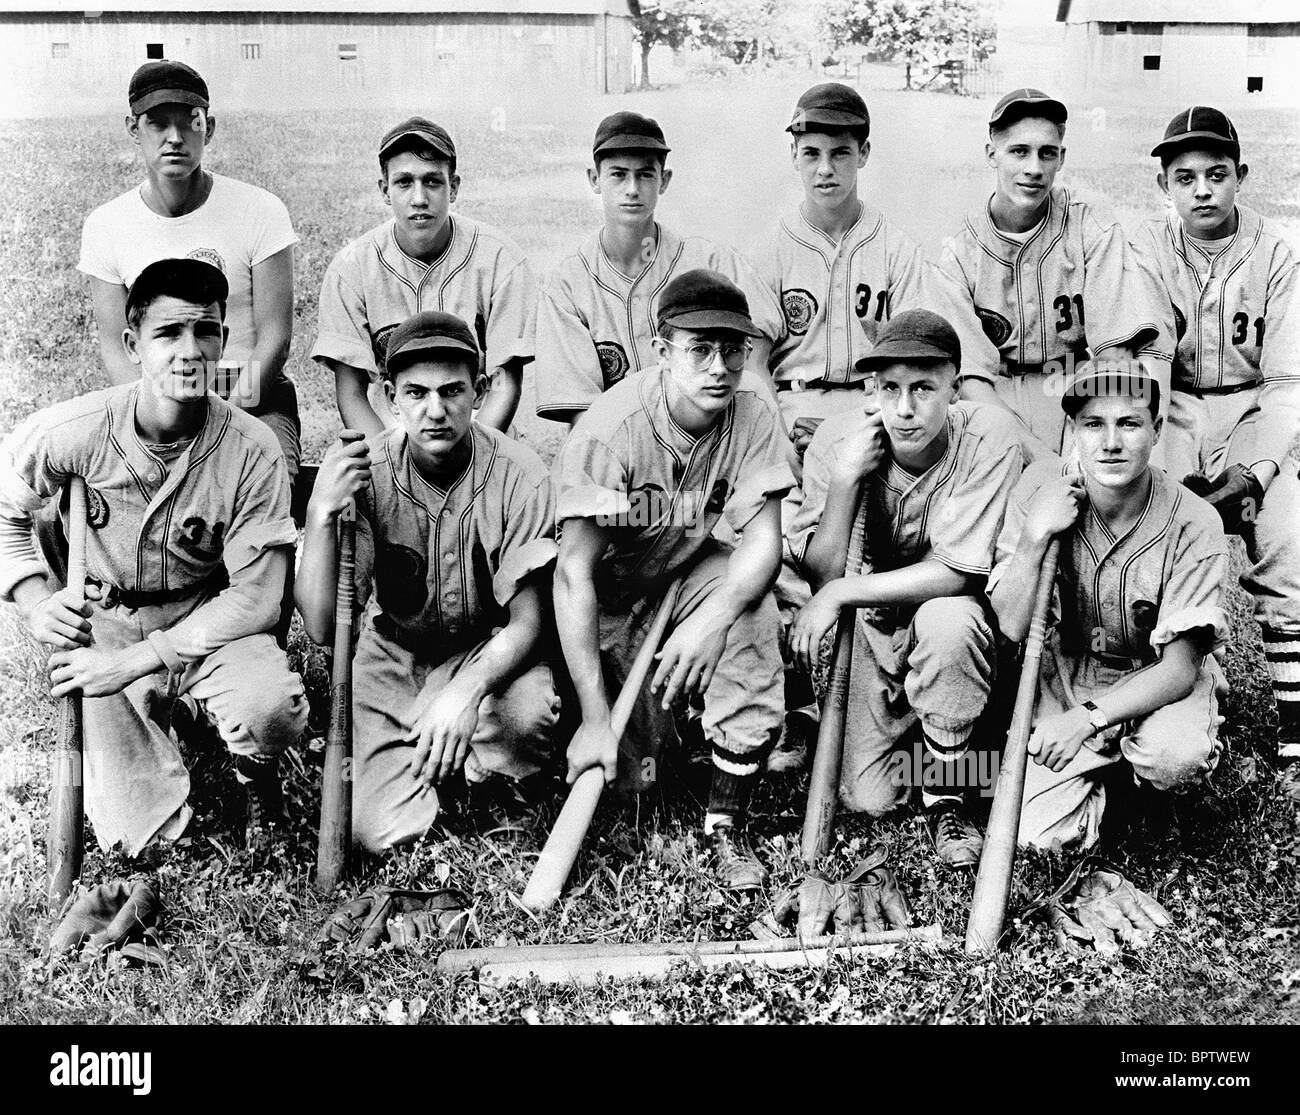 JAMES DEAN'S COLLEGE BASEBALL TEAM COLLEGE PHOTO OF ACTOR (1947) Stock Photo